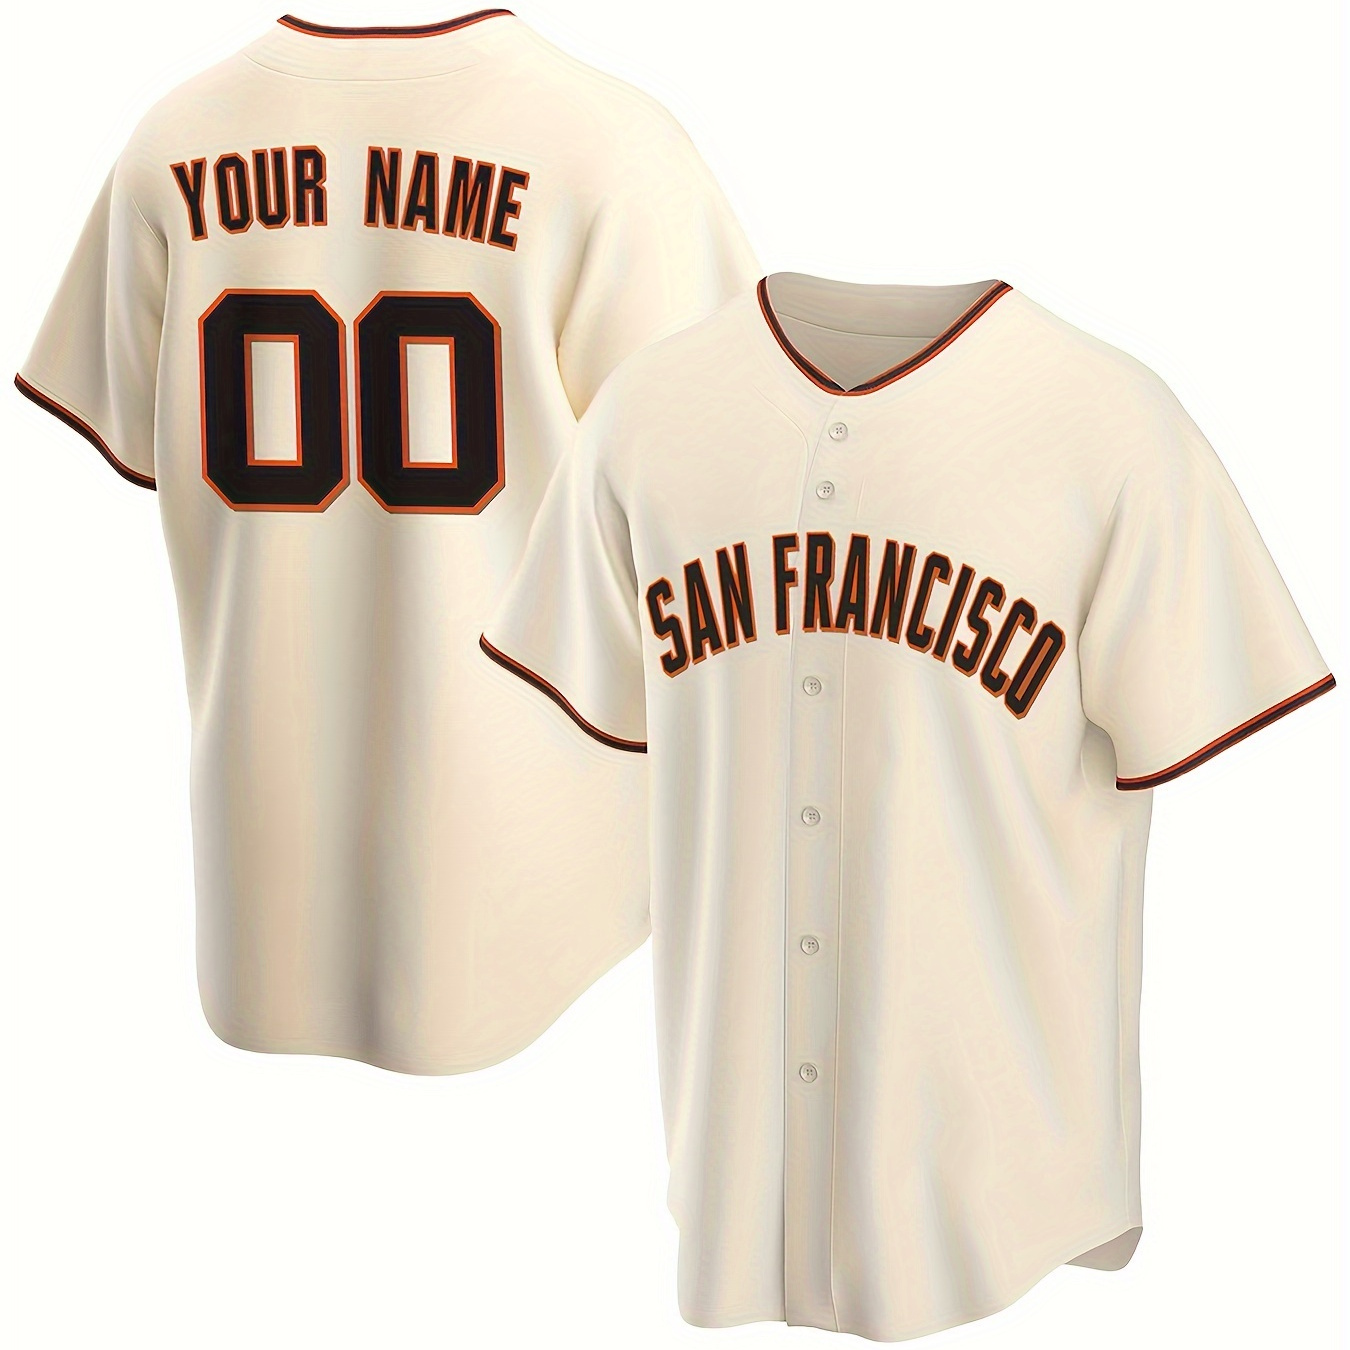 

Customized Name And Number Design, Men's San Francisco Short Sleeve Loose Breathable V-neck Embroidery Baseball Jersey, Sports Shirt For Team Training